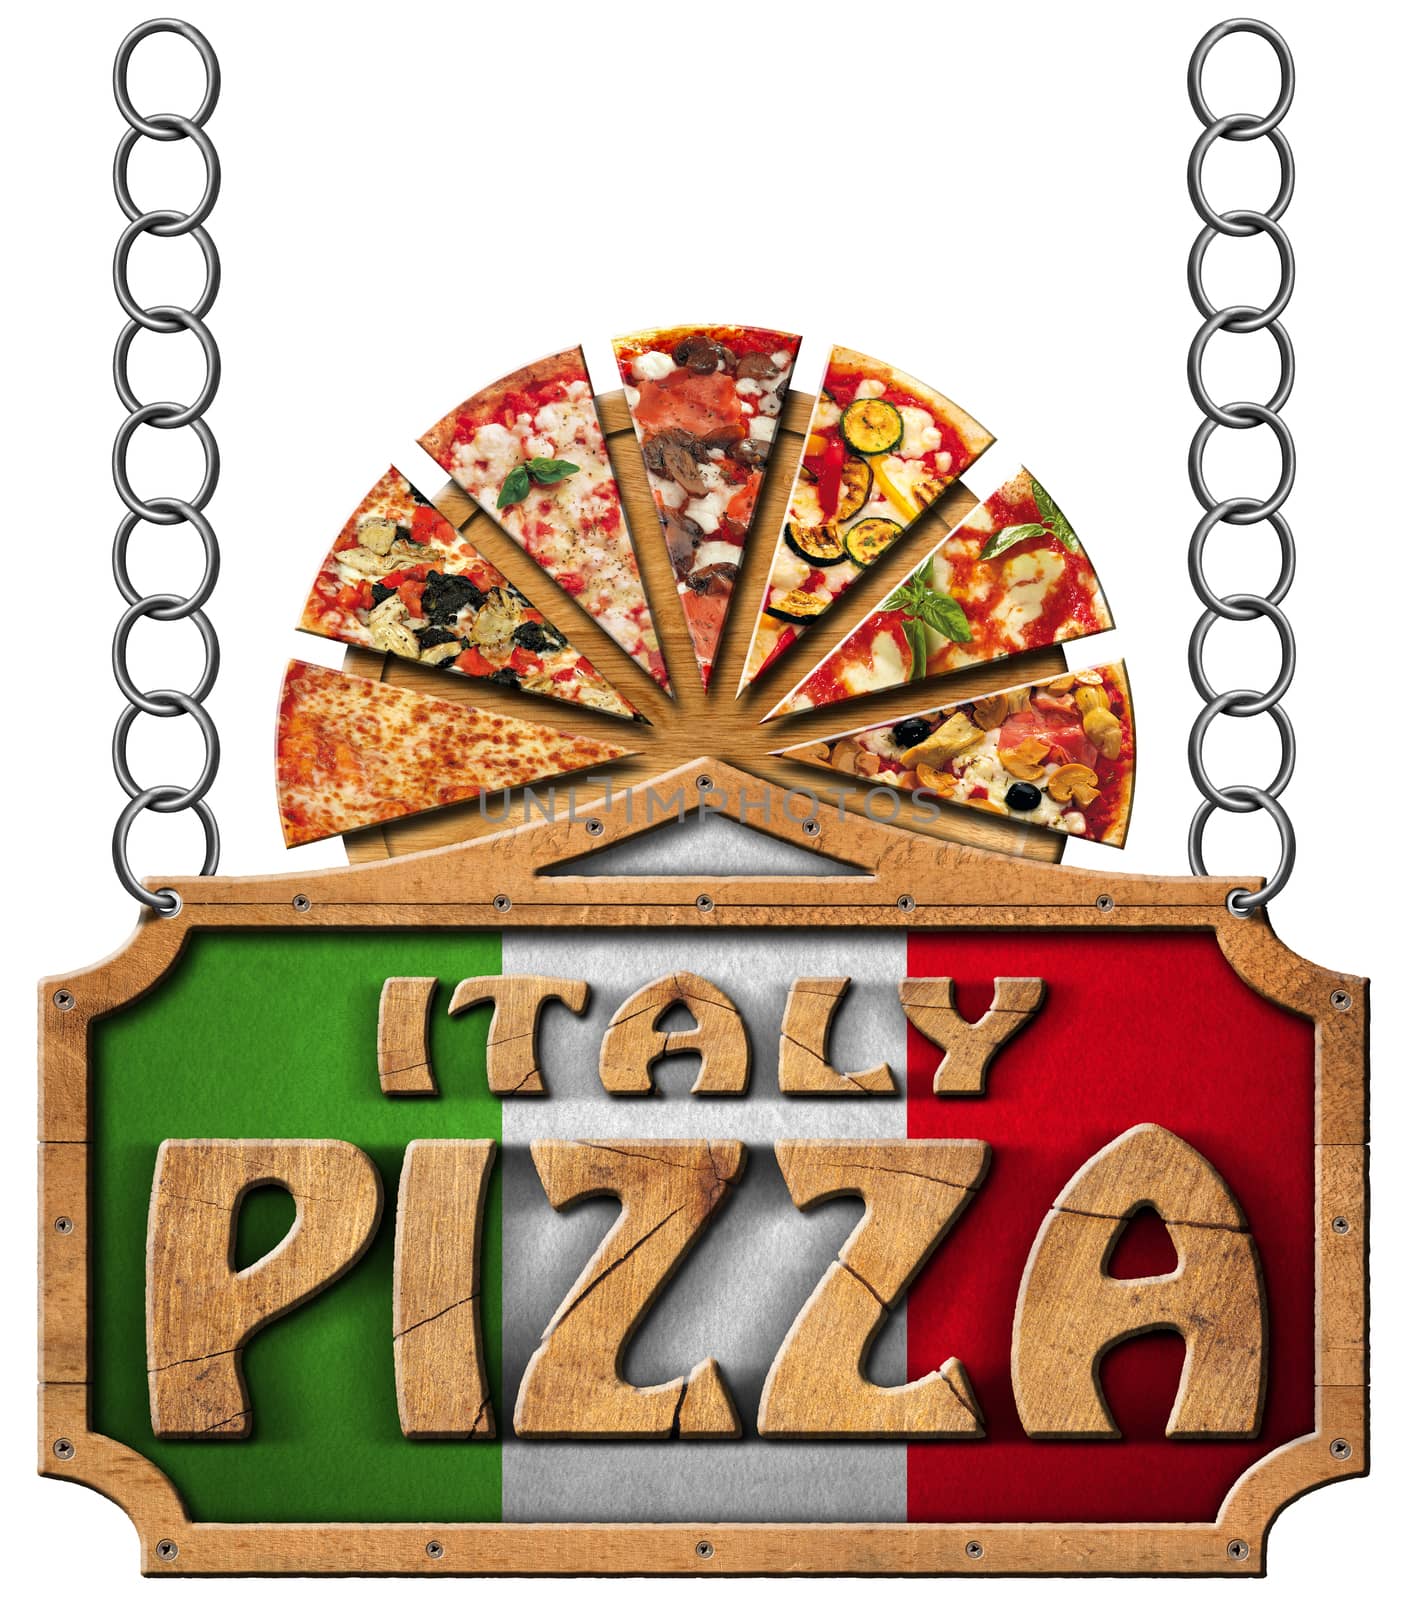 Wooden sign with frame and text Italy pizza, slices of pizza on cutting board. Hanging on a metal chain and isolated on a white background